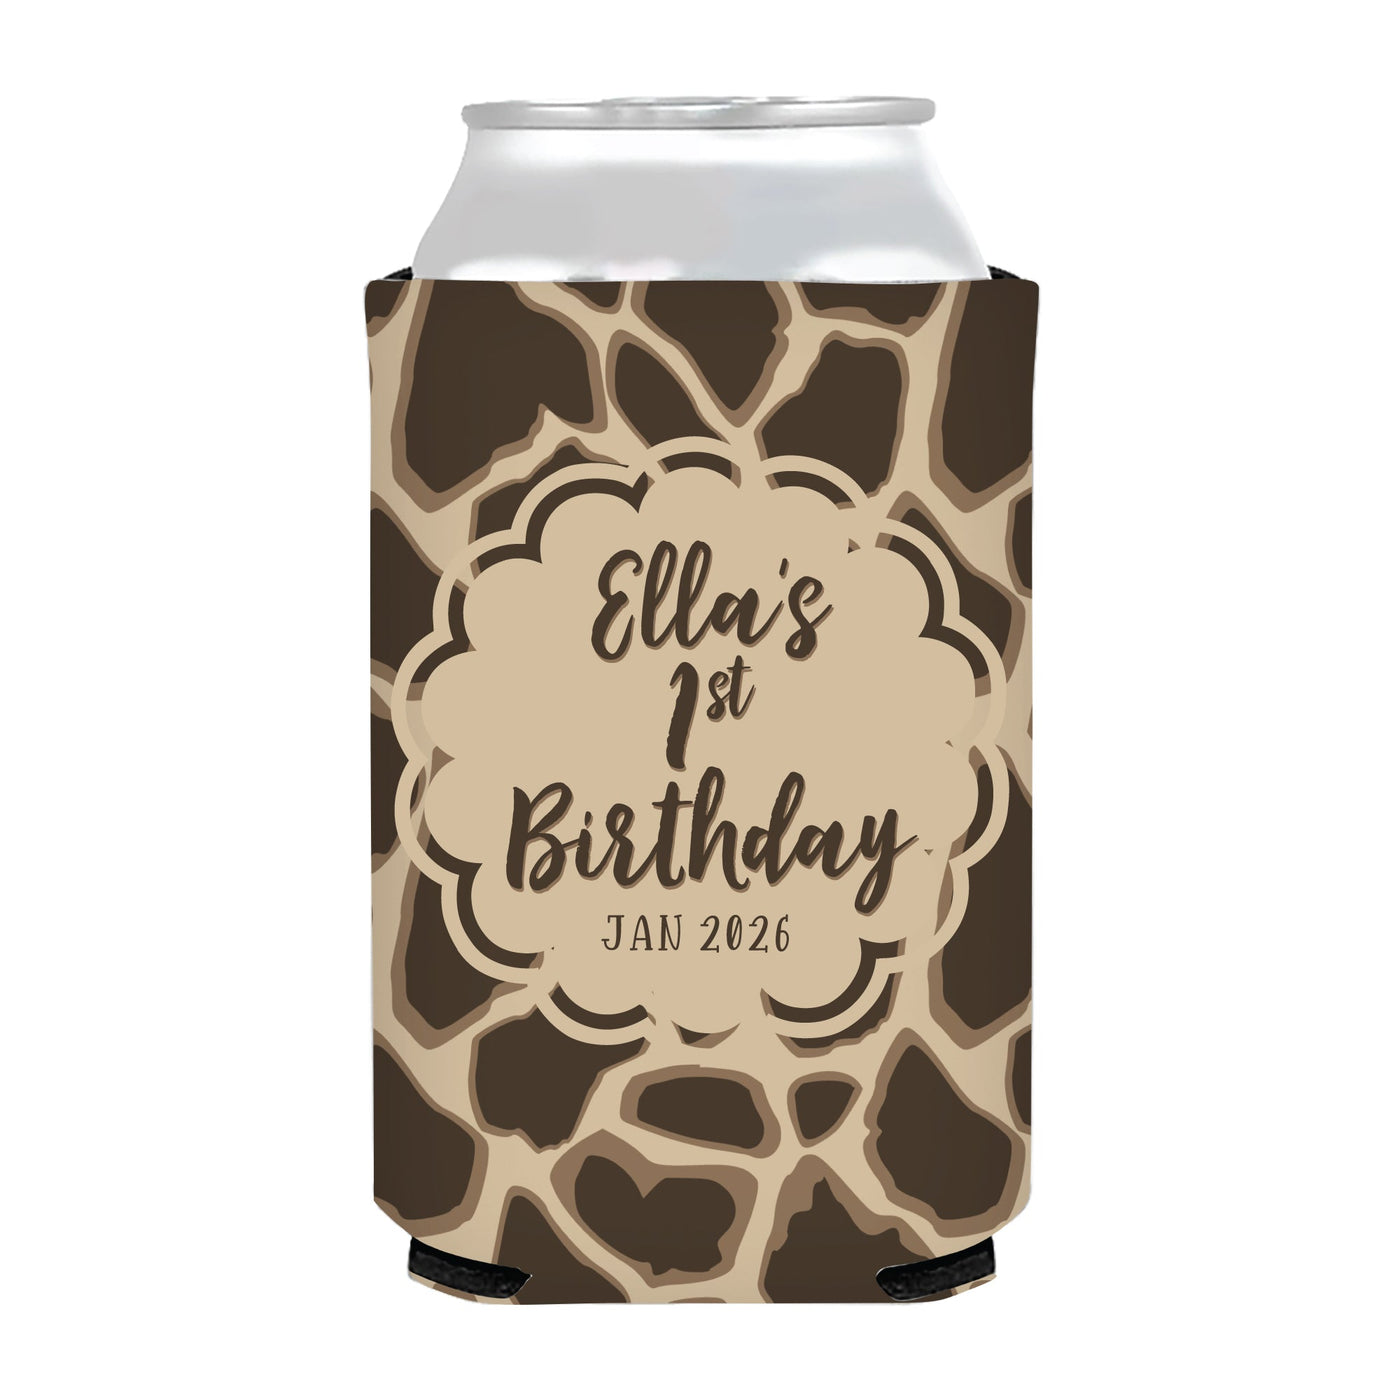 Giraffe Print Full Color Birthday Party Can Coolers, Multi Color Safari Birthday Favors, Any Age